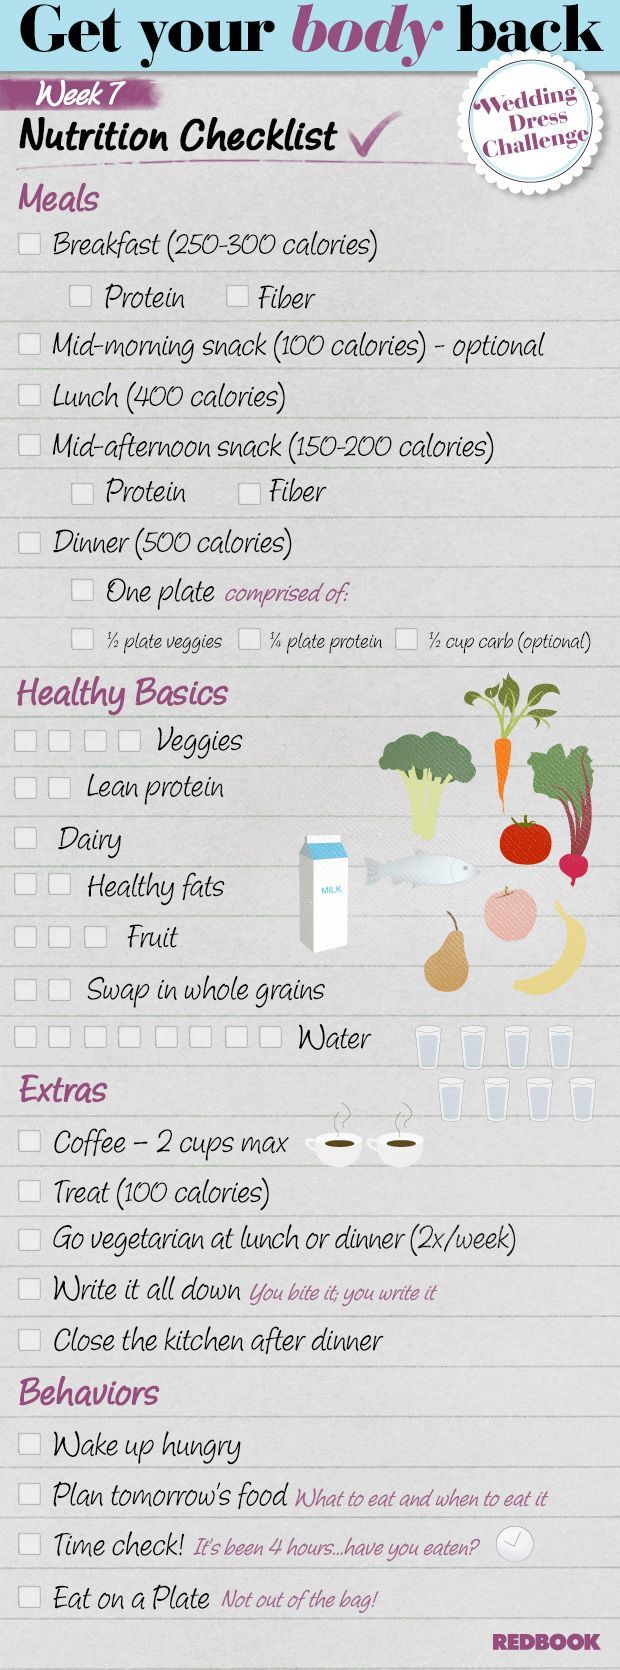 Nutrition checklist. This is a good